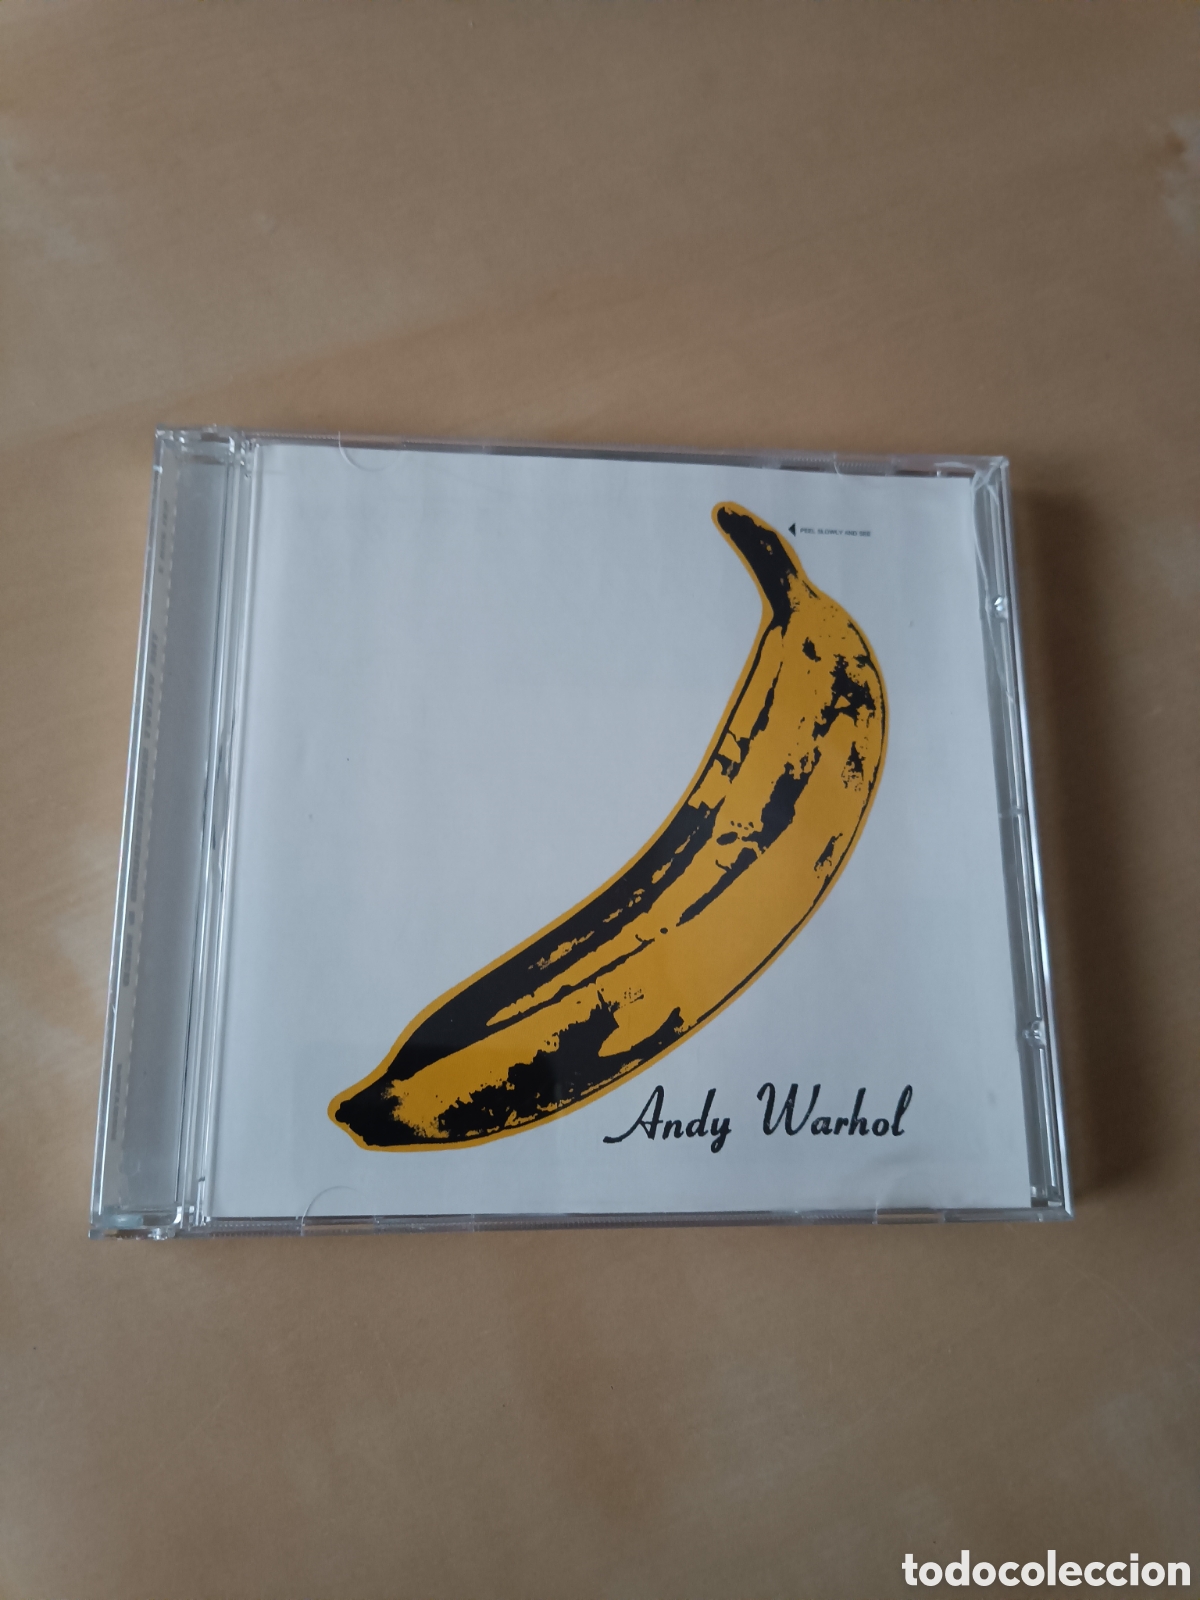 cd the velvet underground & nico - andy warhol - Buy CD's of other music  styles on todocoleccion